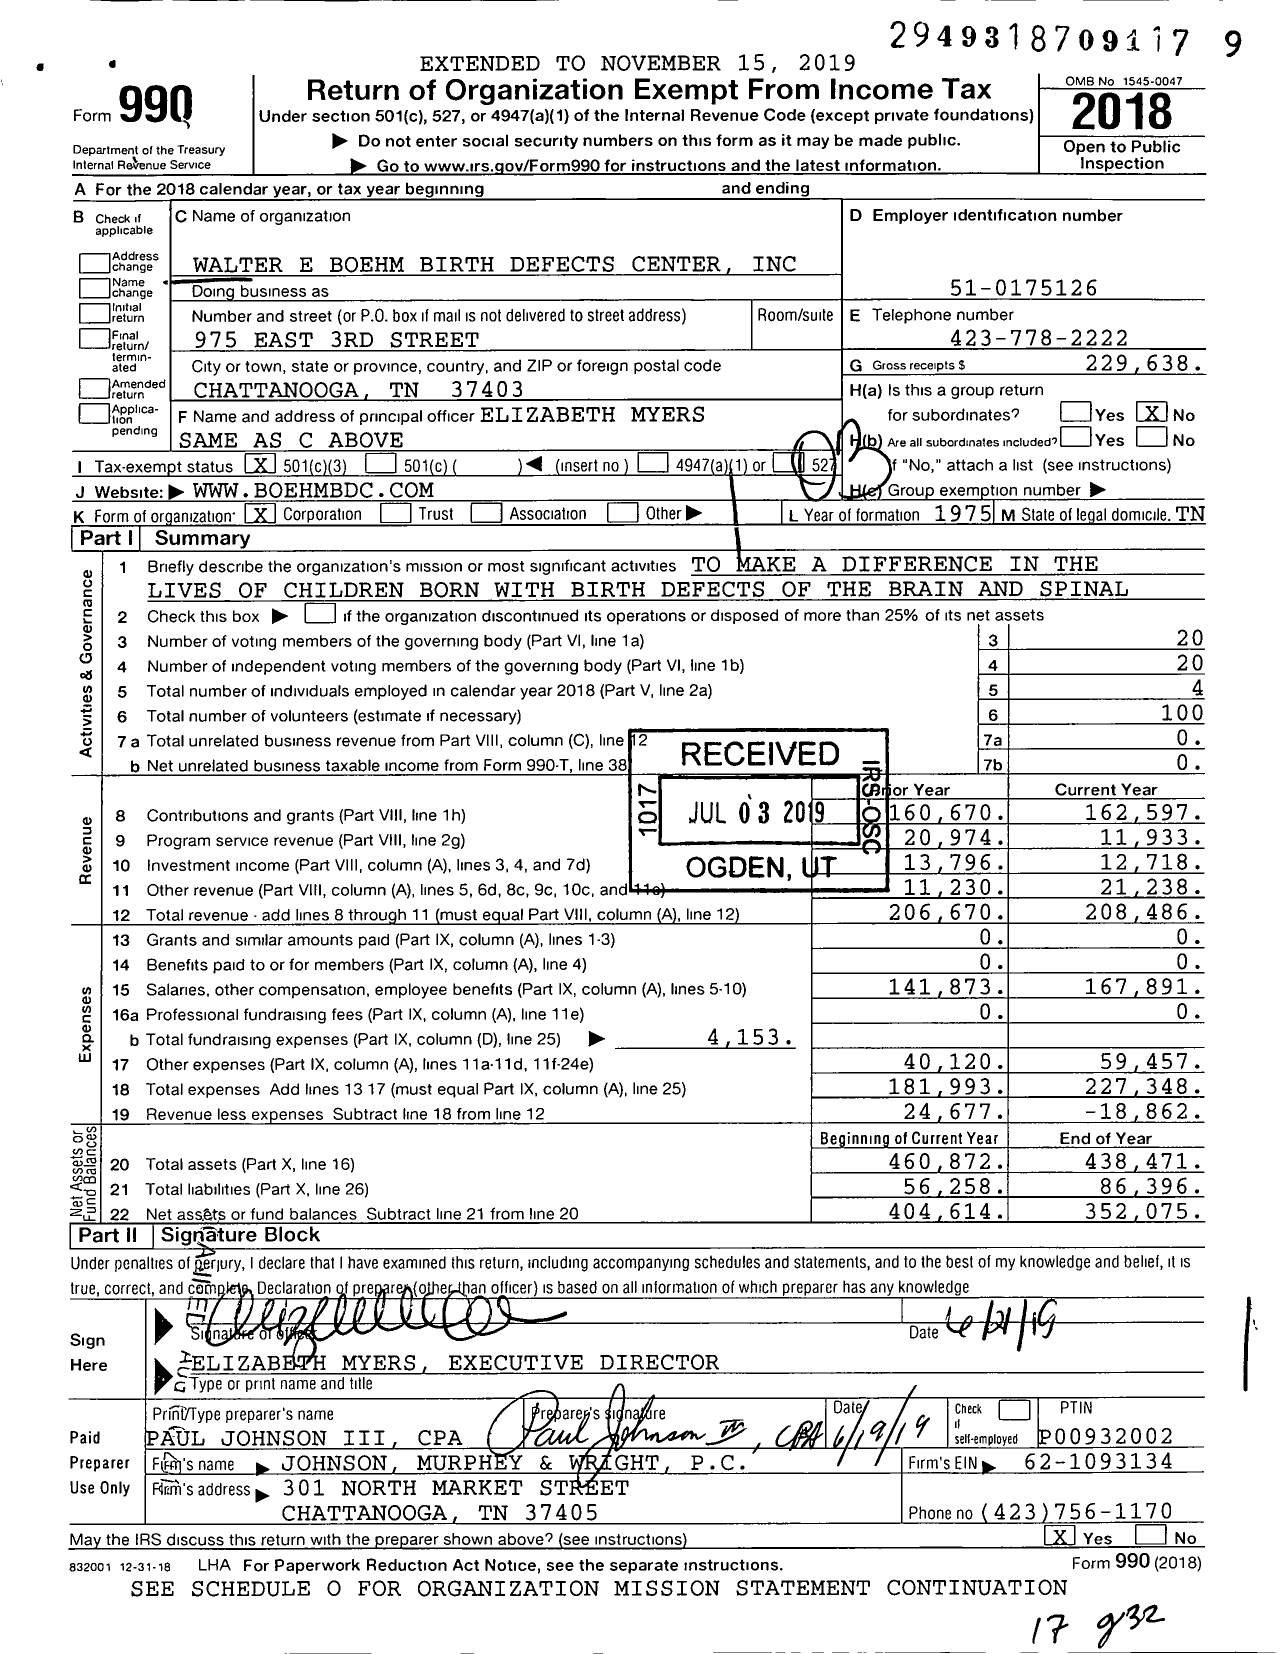 Image of first page of 2018 Form 990 for Walter E Boehm Birth Defects Center